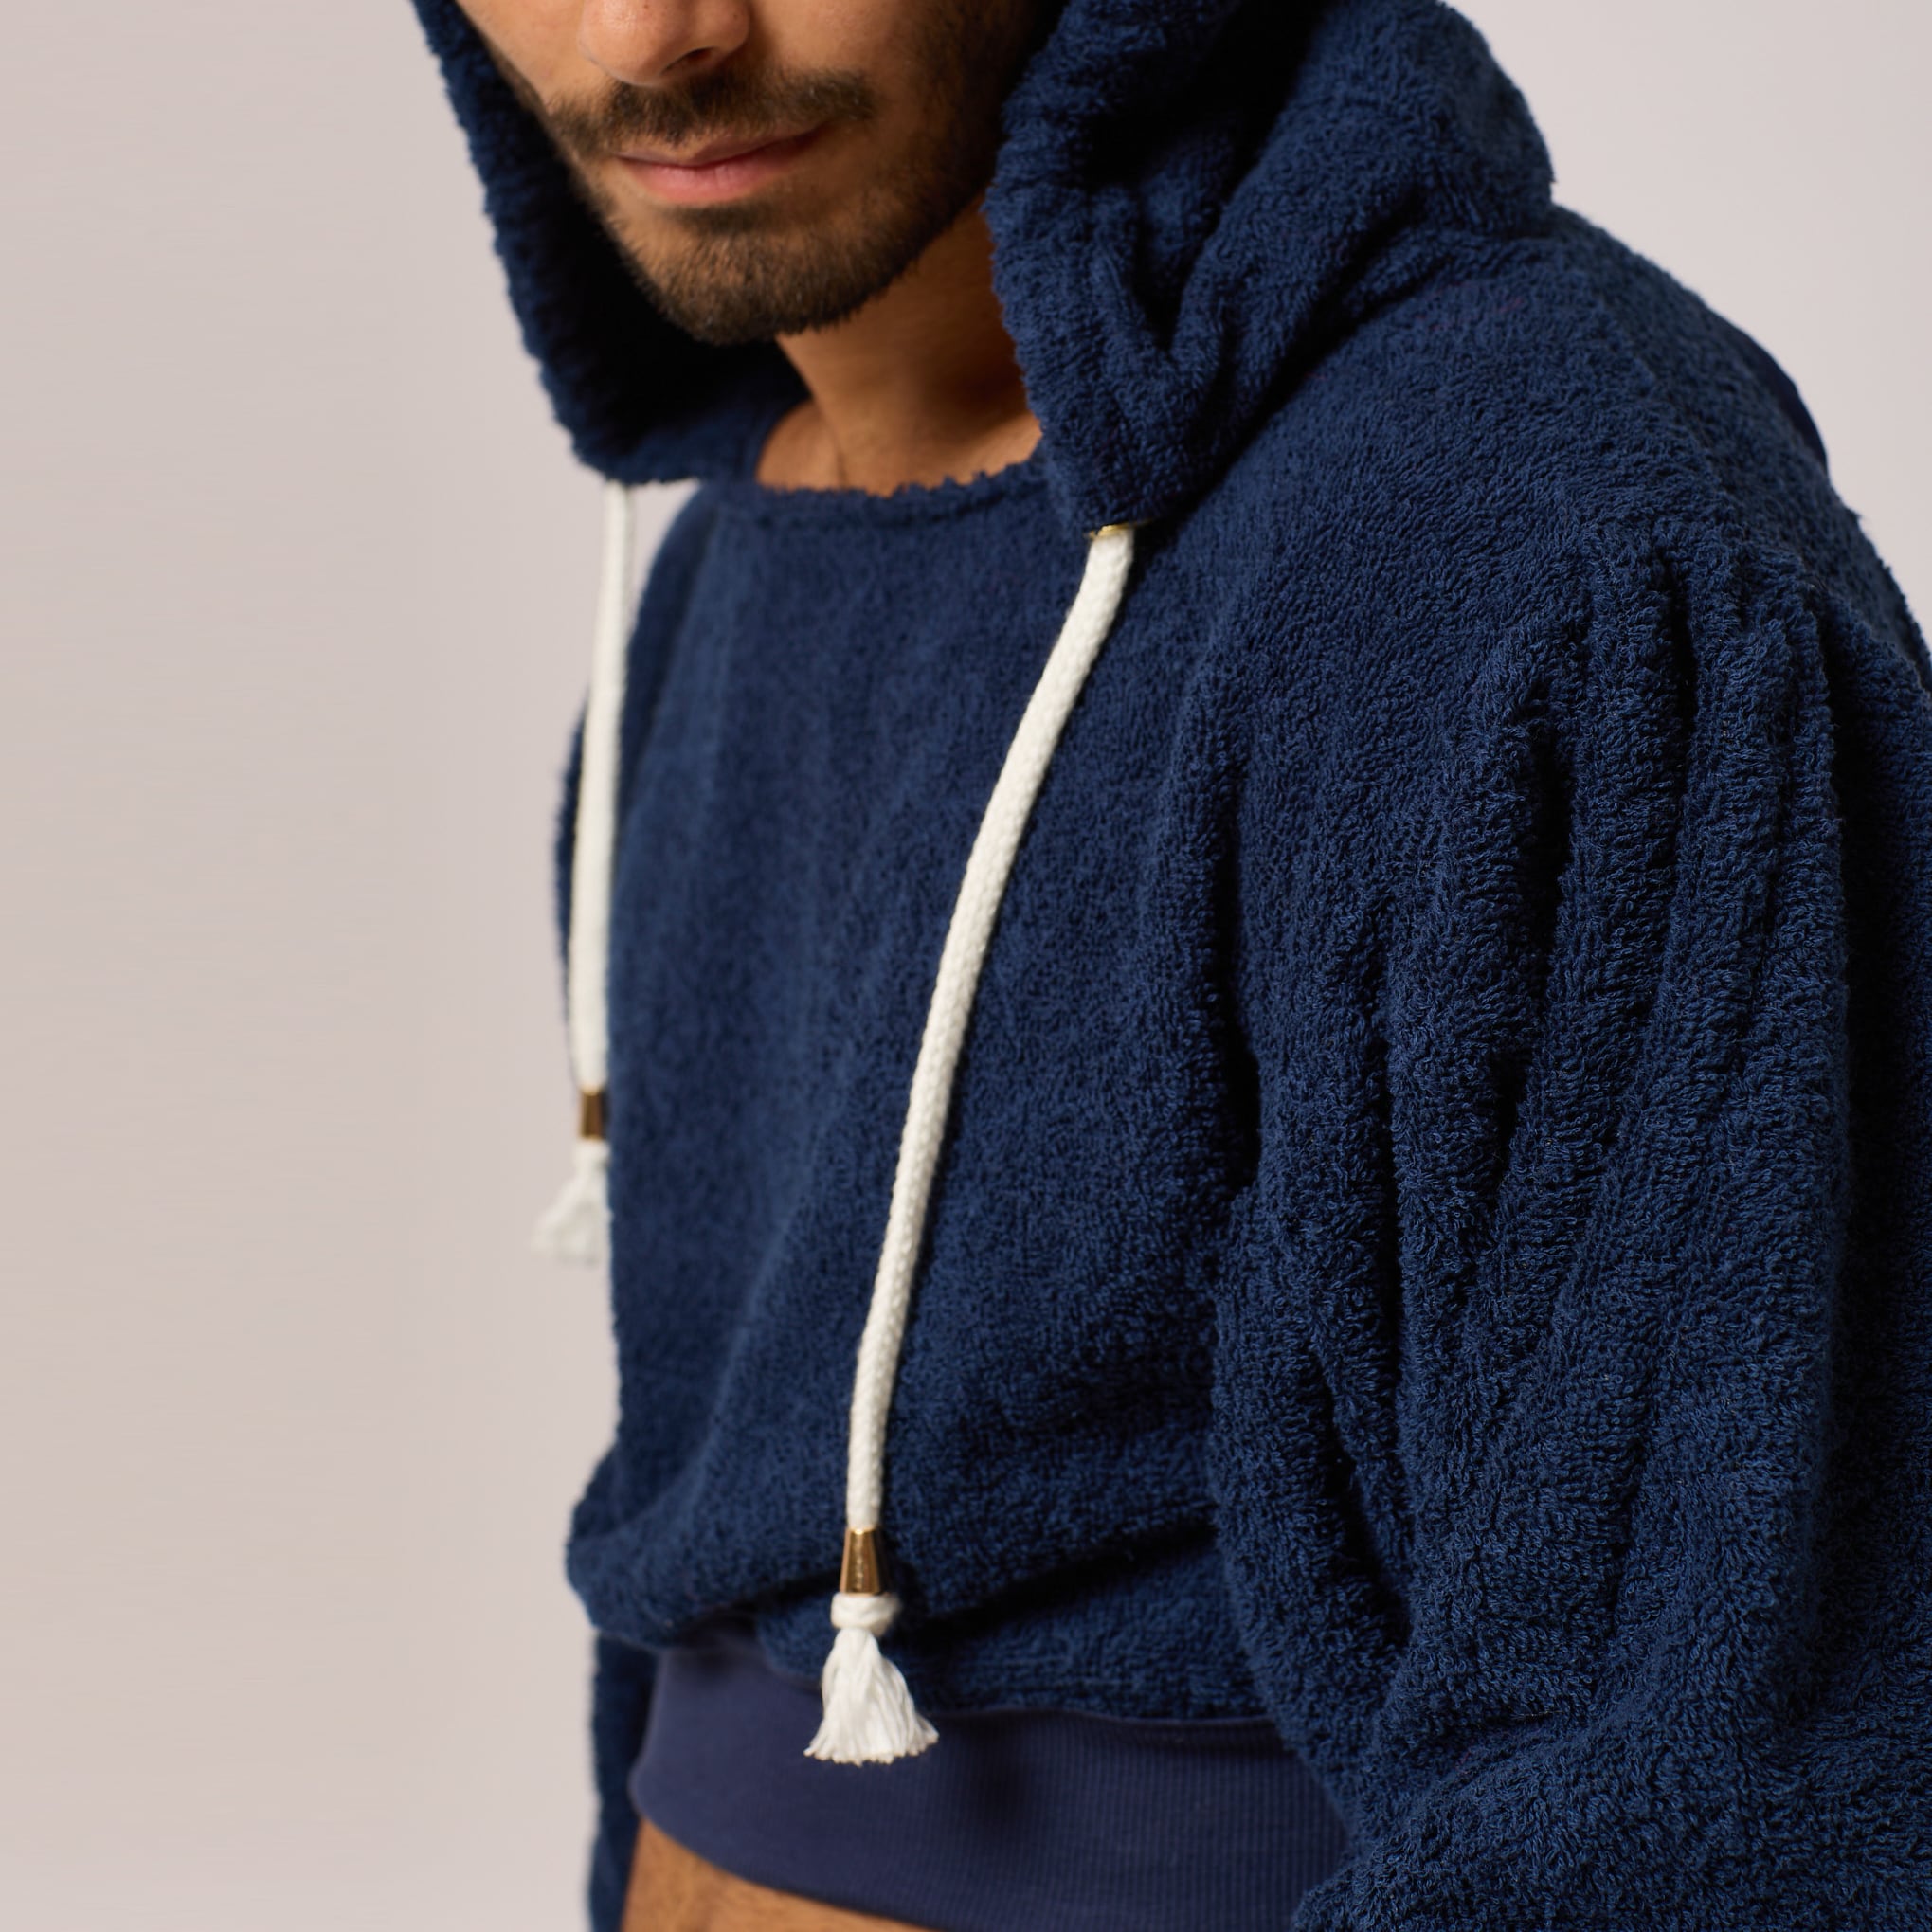 ZERØ London - Close up view, mens zero waste navy cropped hoodie designed & made in London